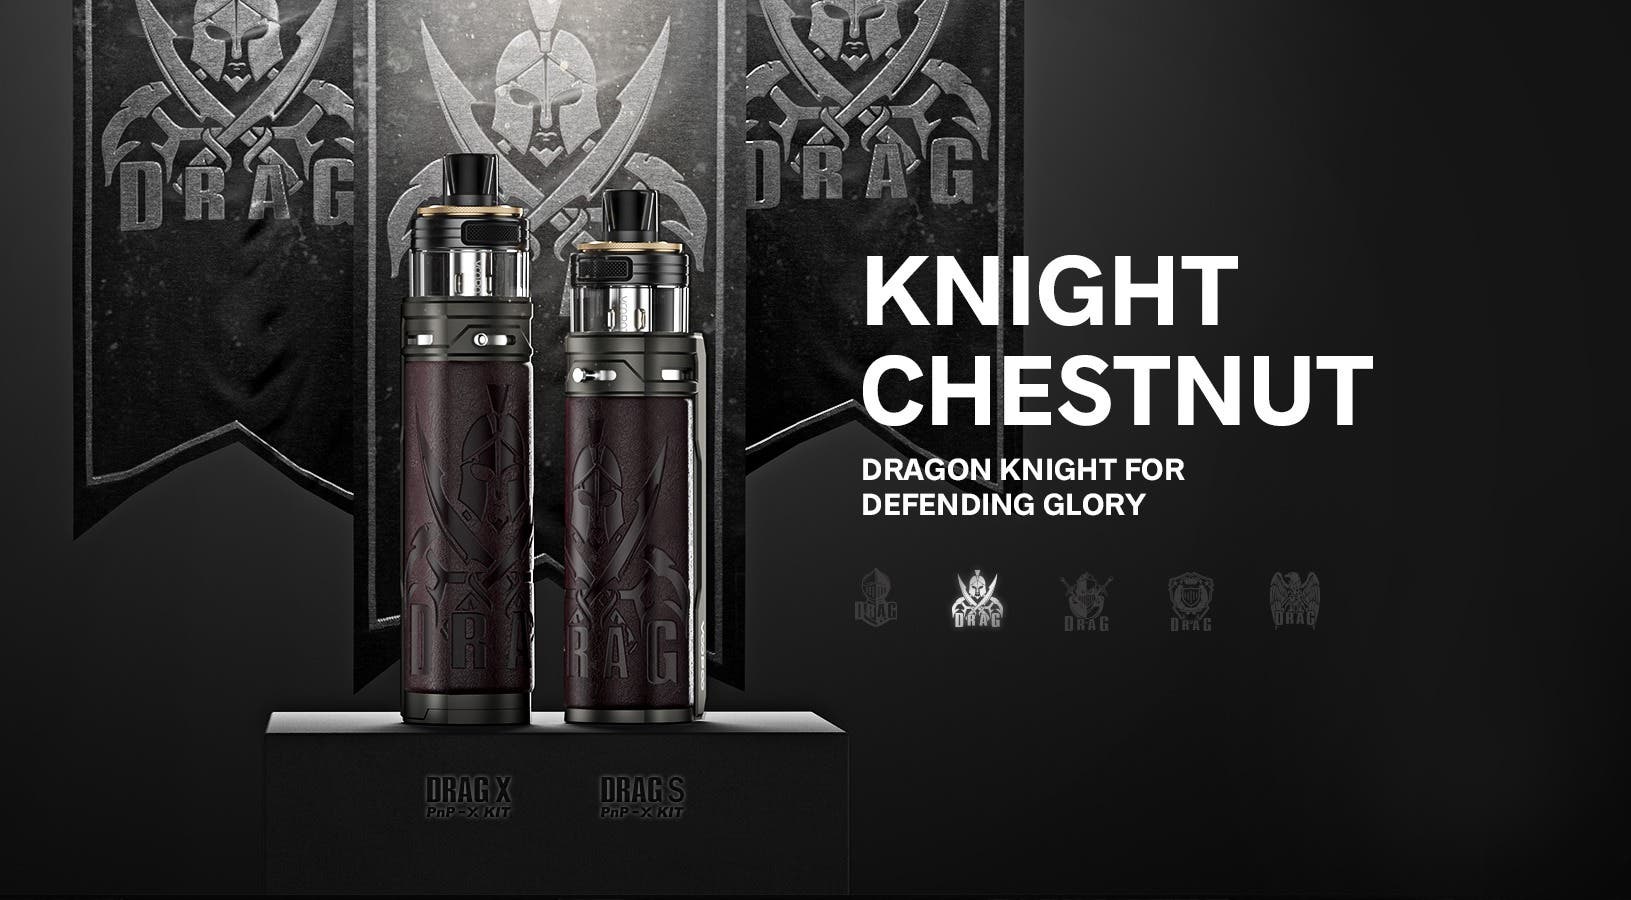 The Drag S PnP-X Pod kit is available in Knight Chestnut.